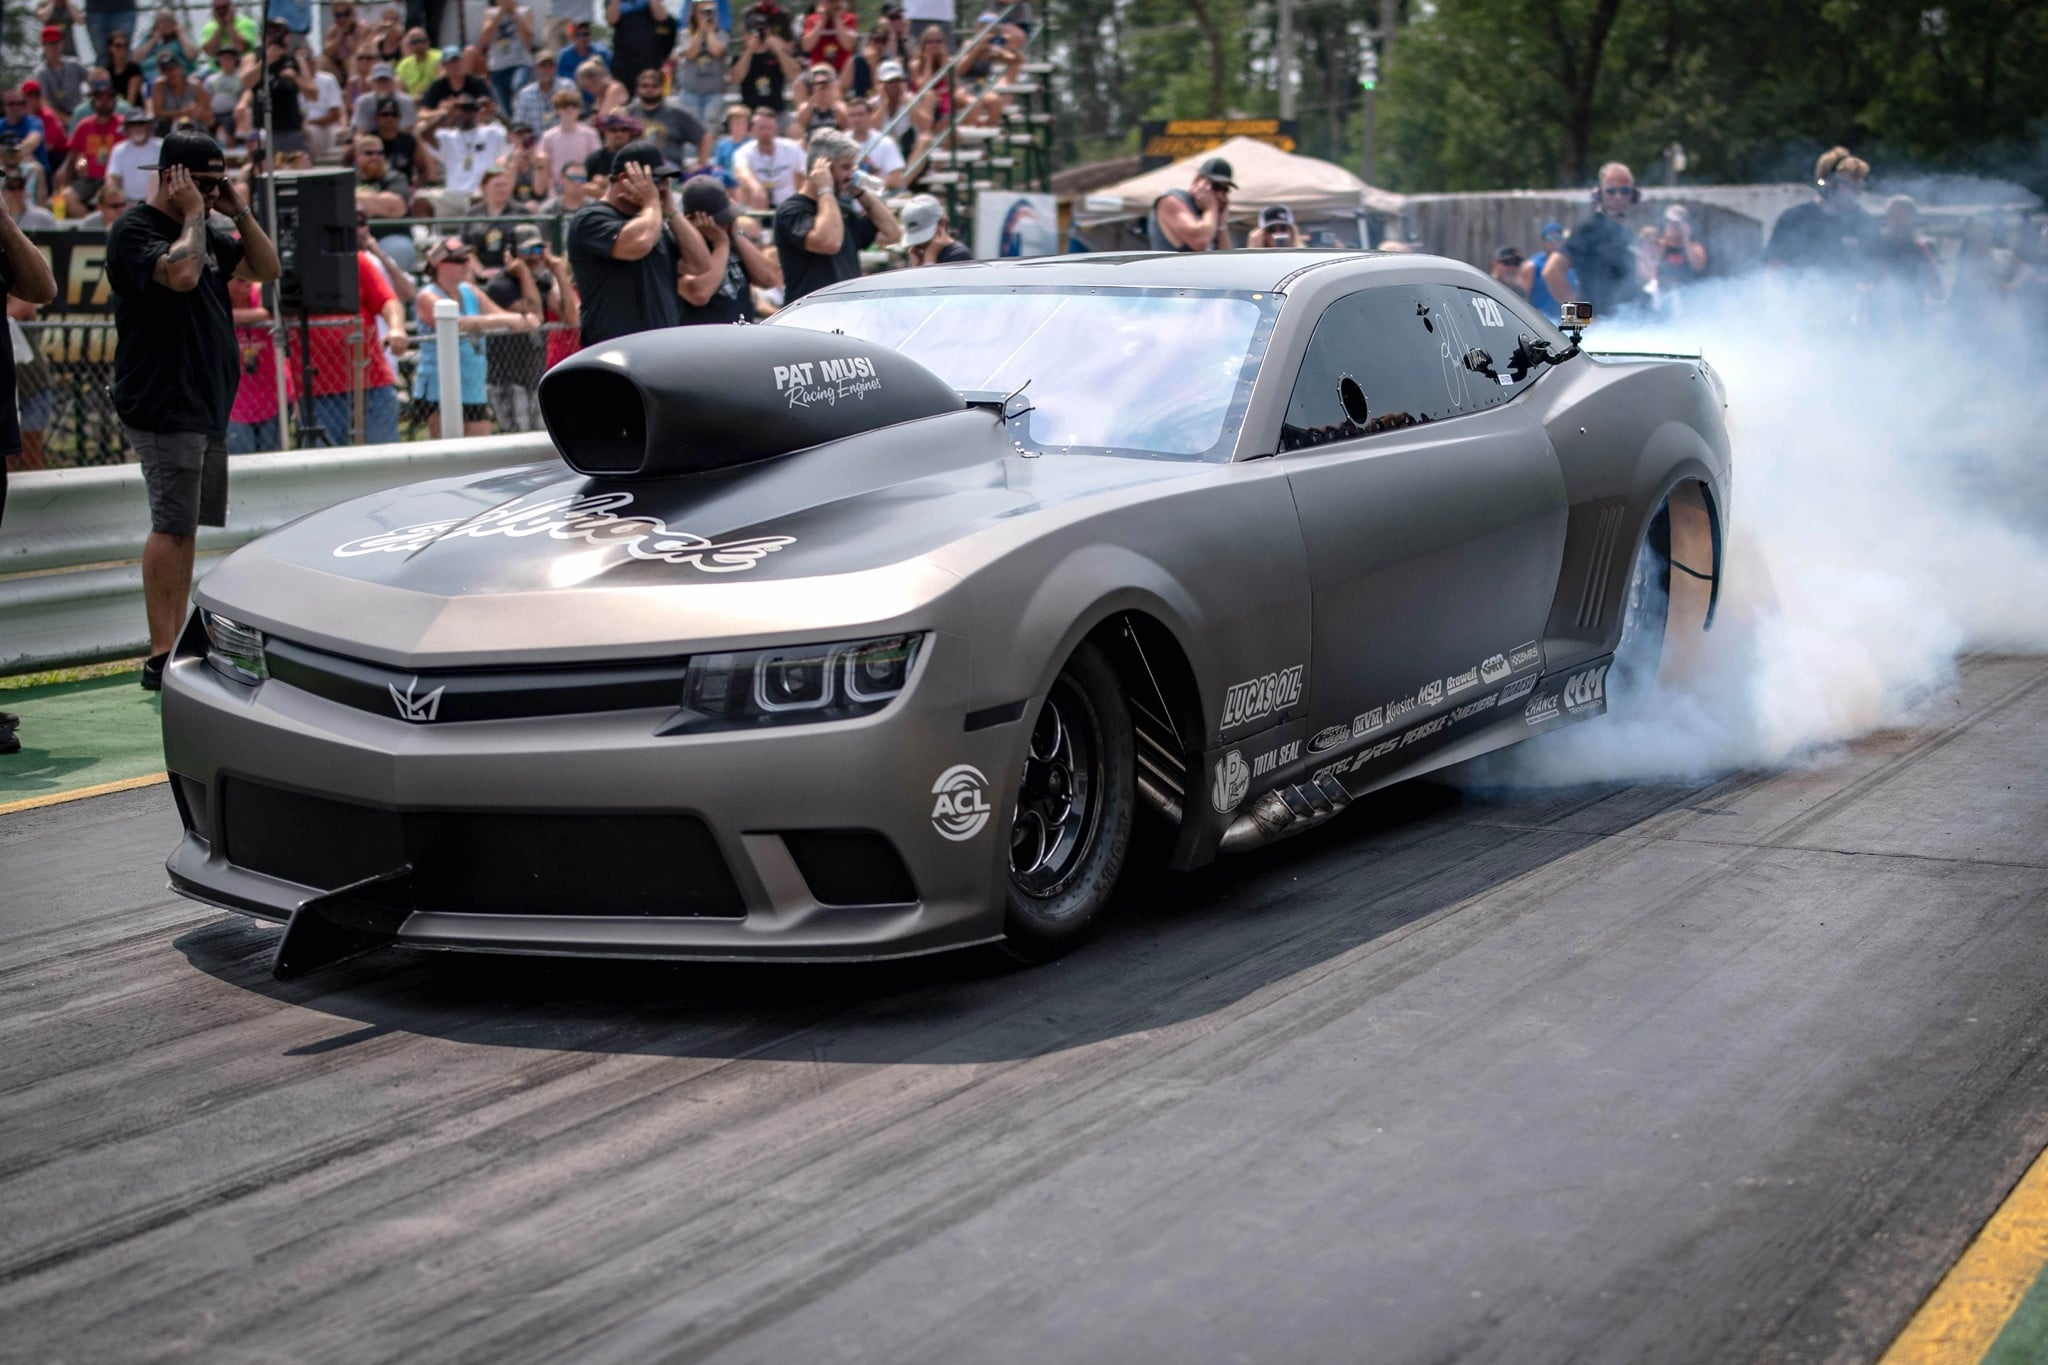 2048x1365 Street Outlaws' national show coming to The Rock The Richmond Observer